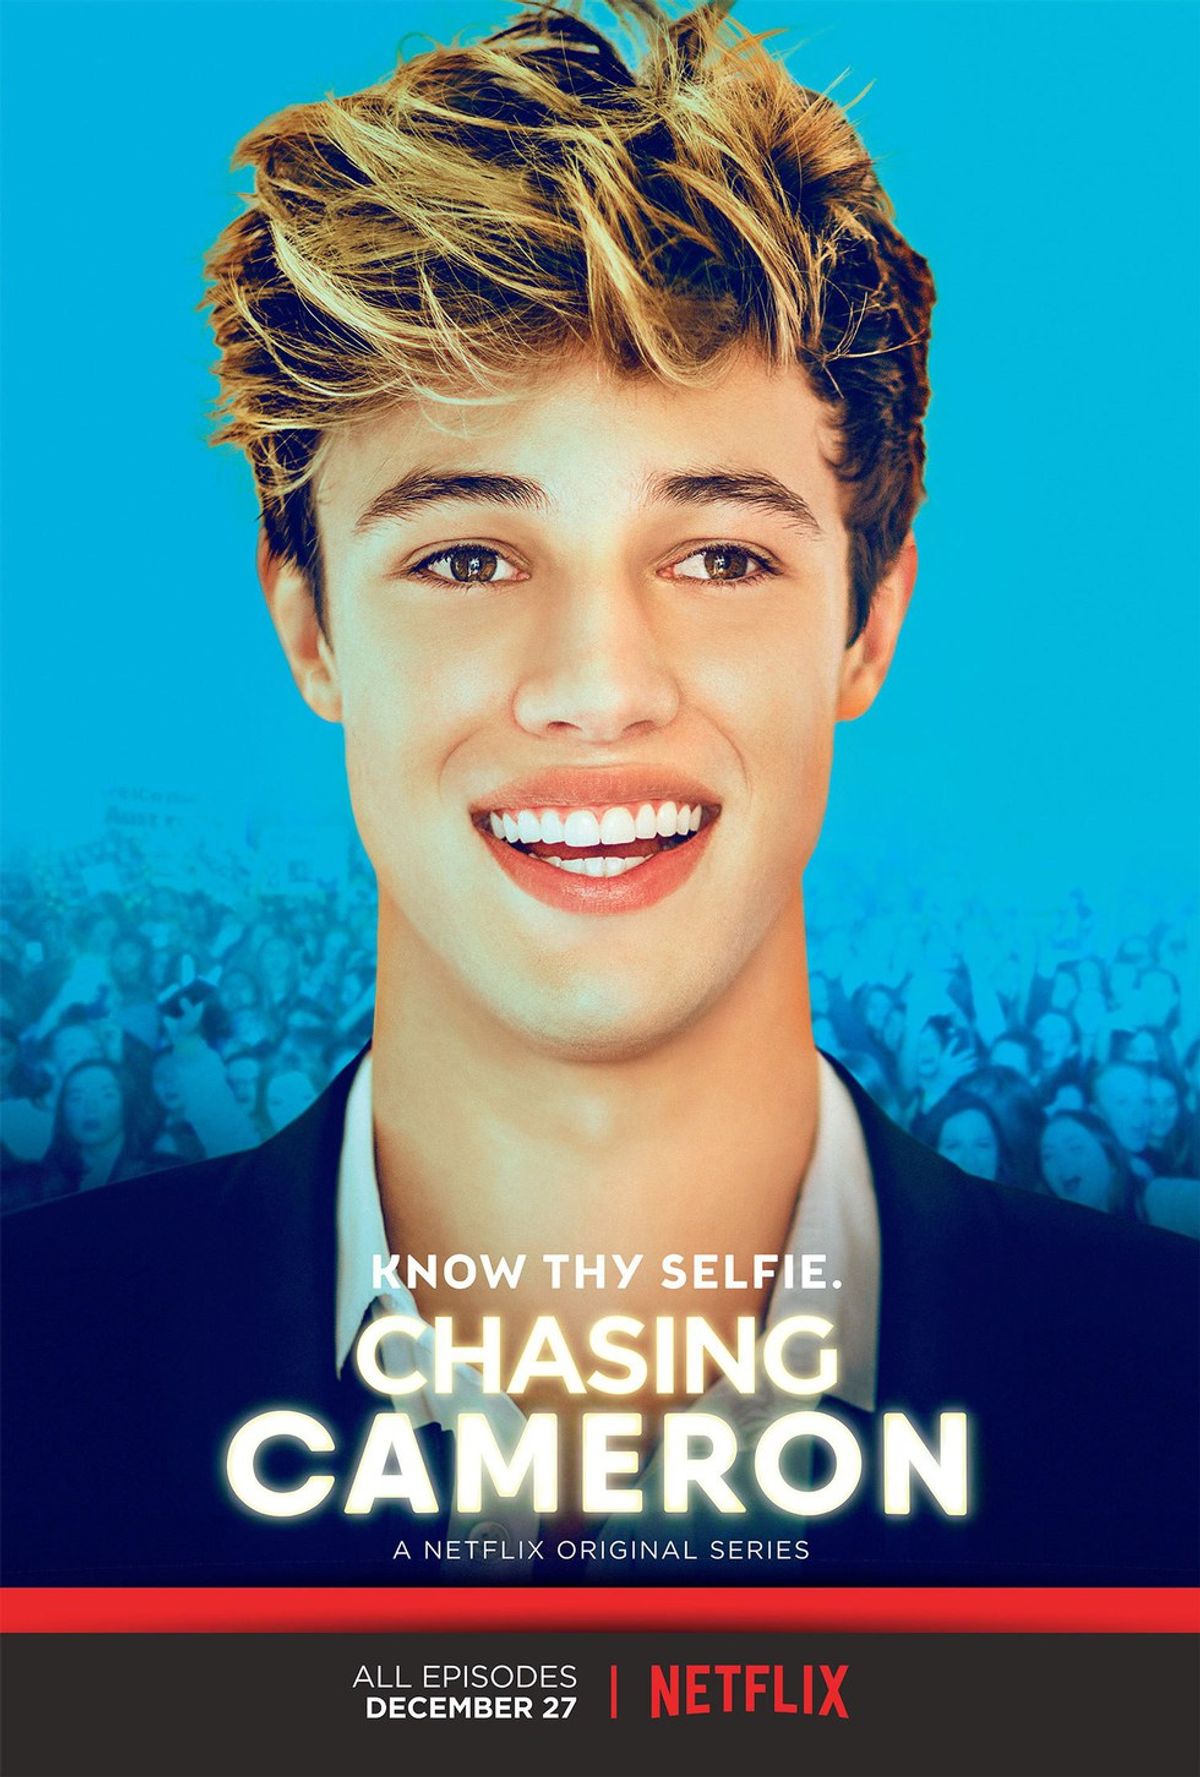 10 Thoughts I Had While Watching Cameron Dallas' Documentary, "Chasing Cameron"